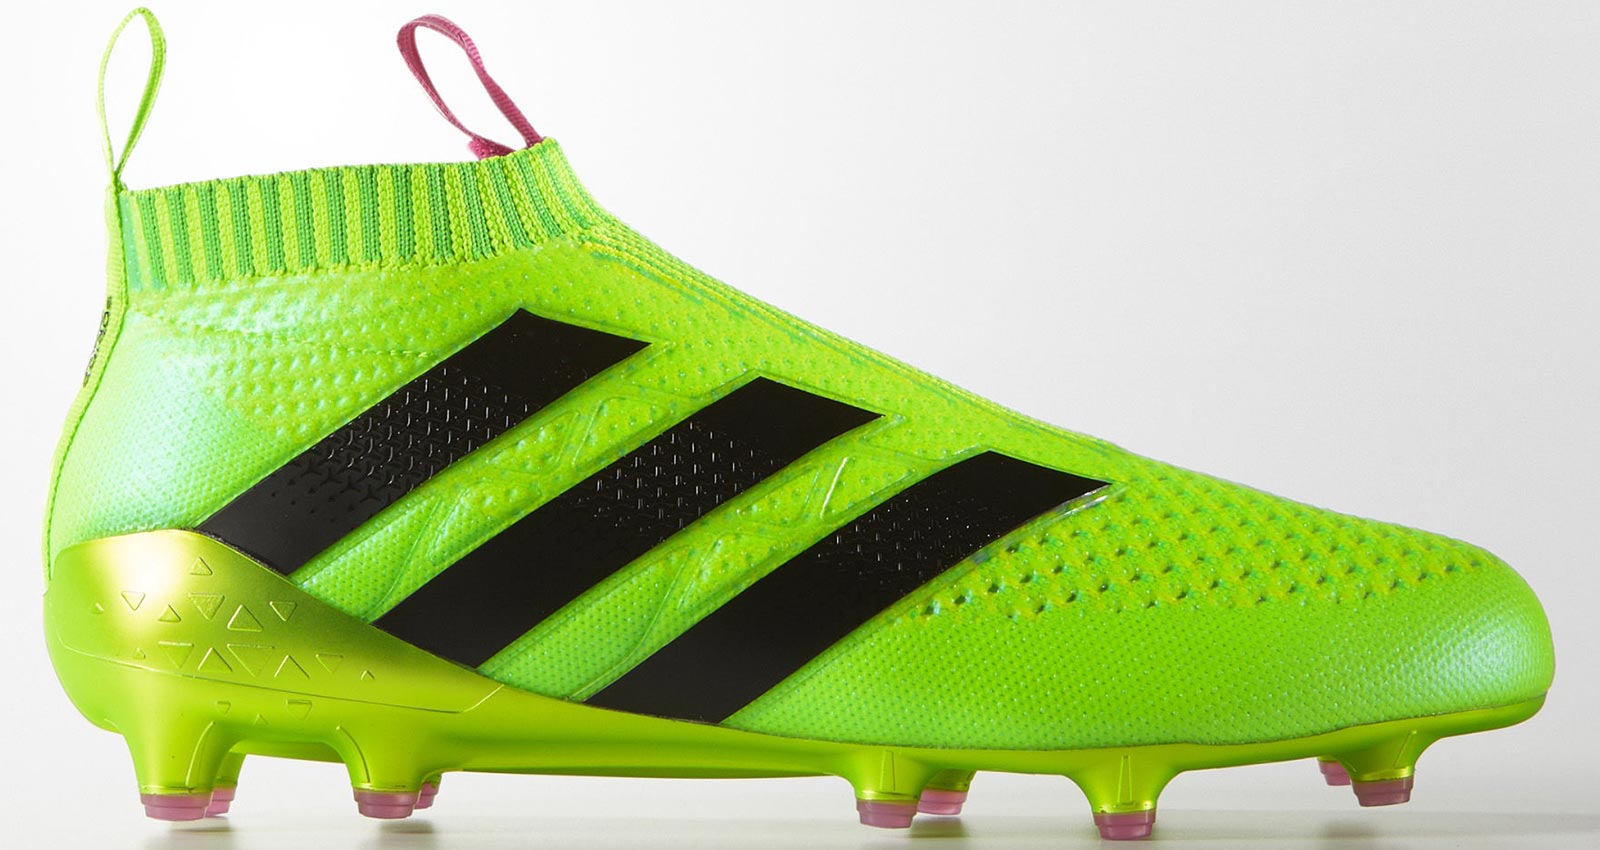 Goodbye - Here Is The History Of The Adidas Ace Boots - Footy Headlines